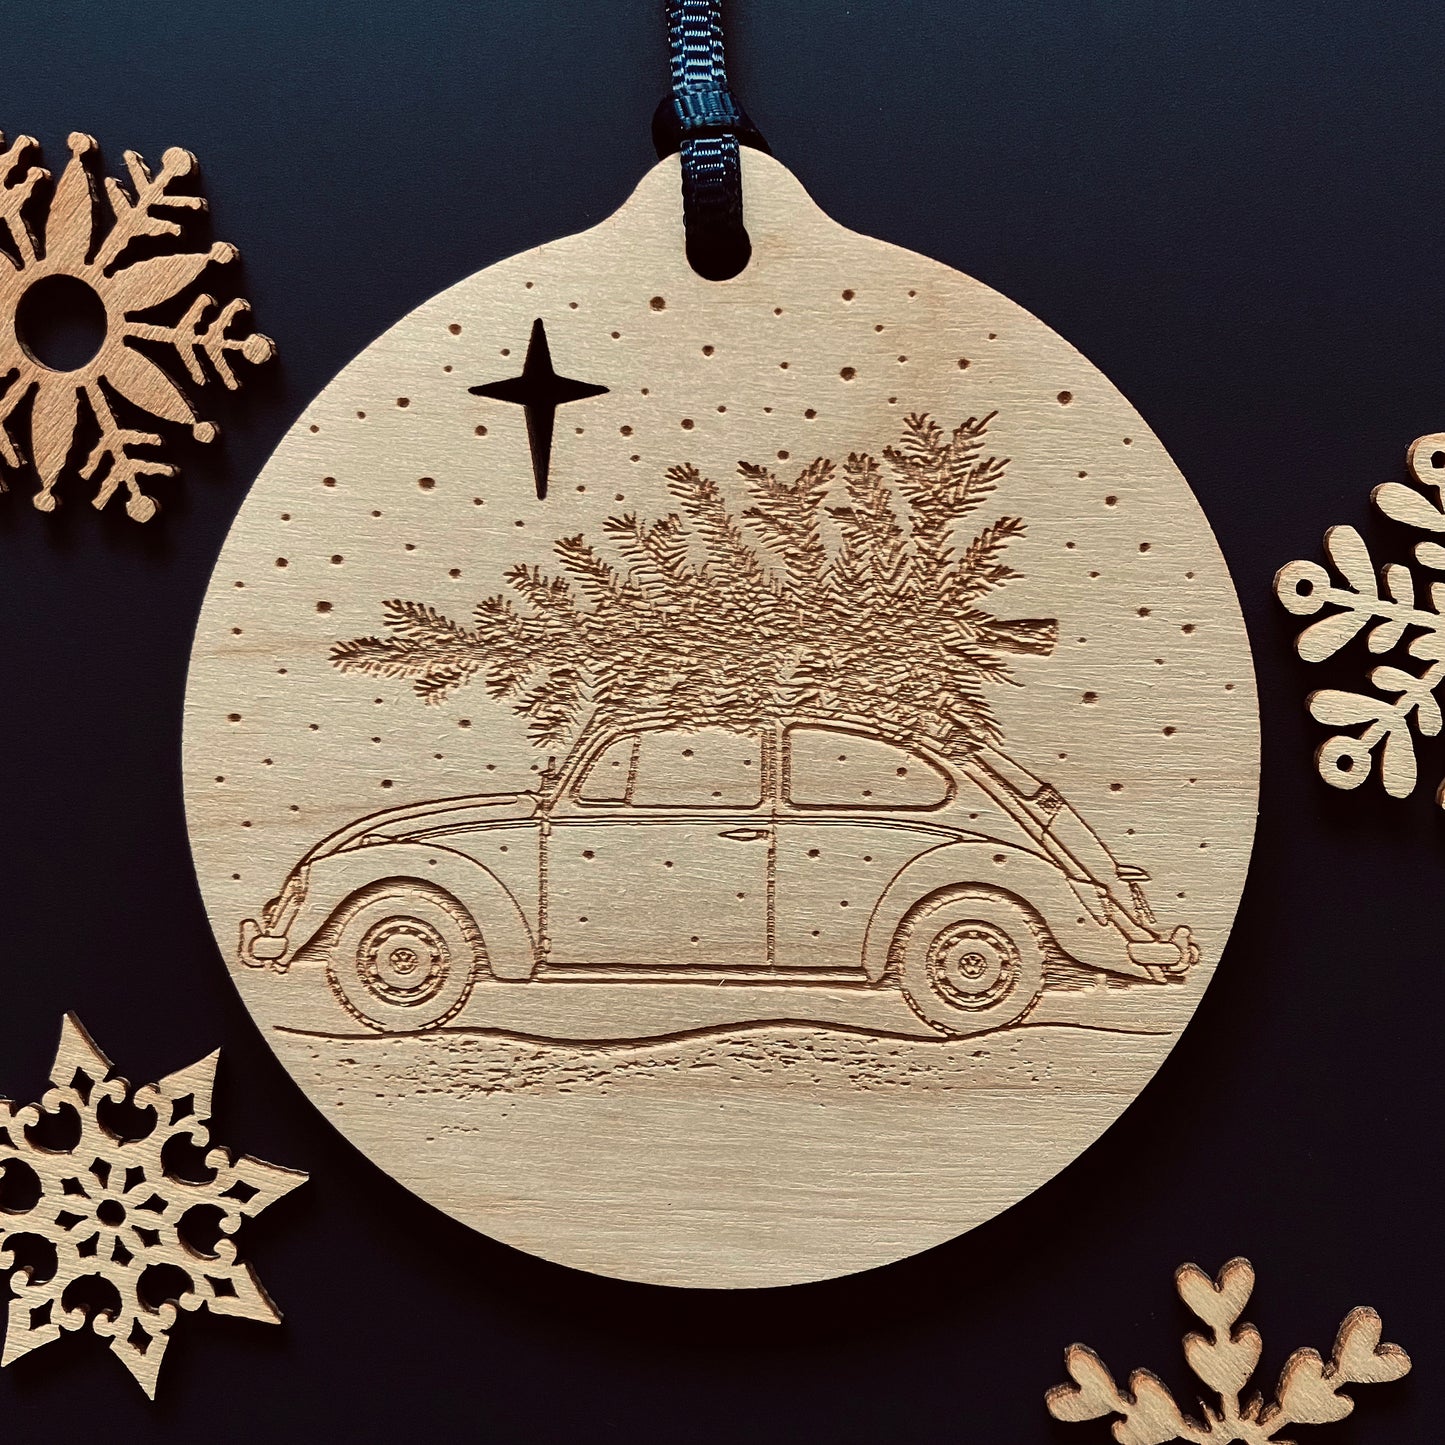 Classic Volkswagen Beetle laser etched Christmas bauble